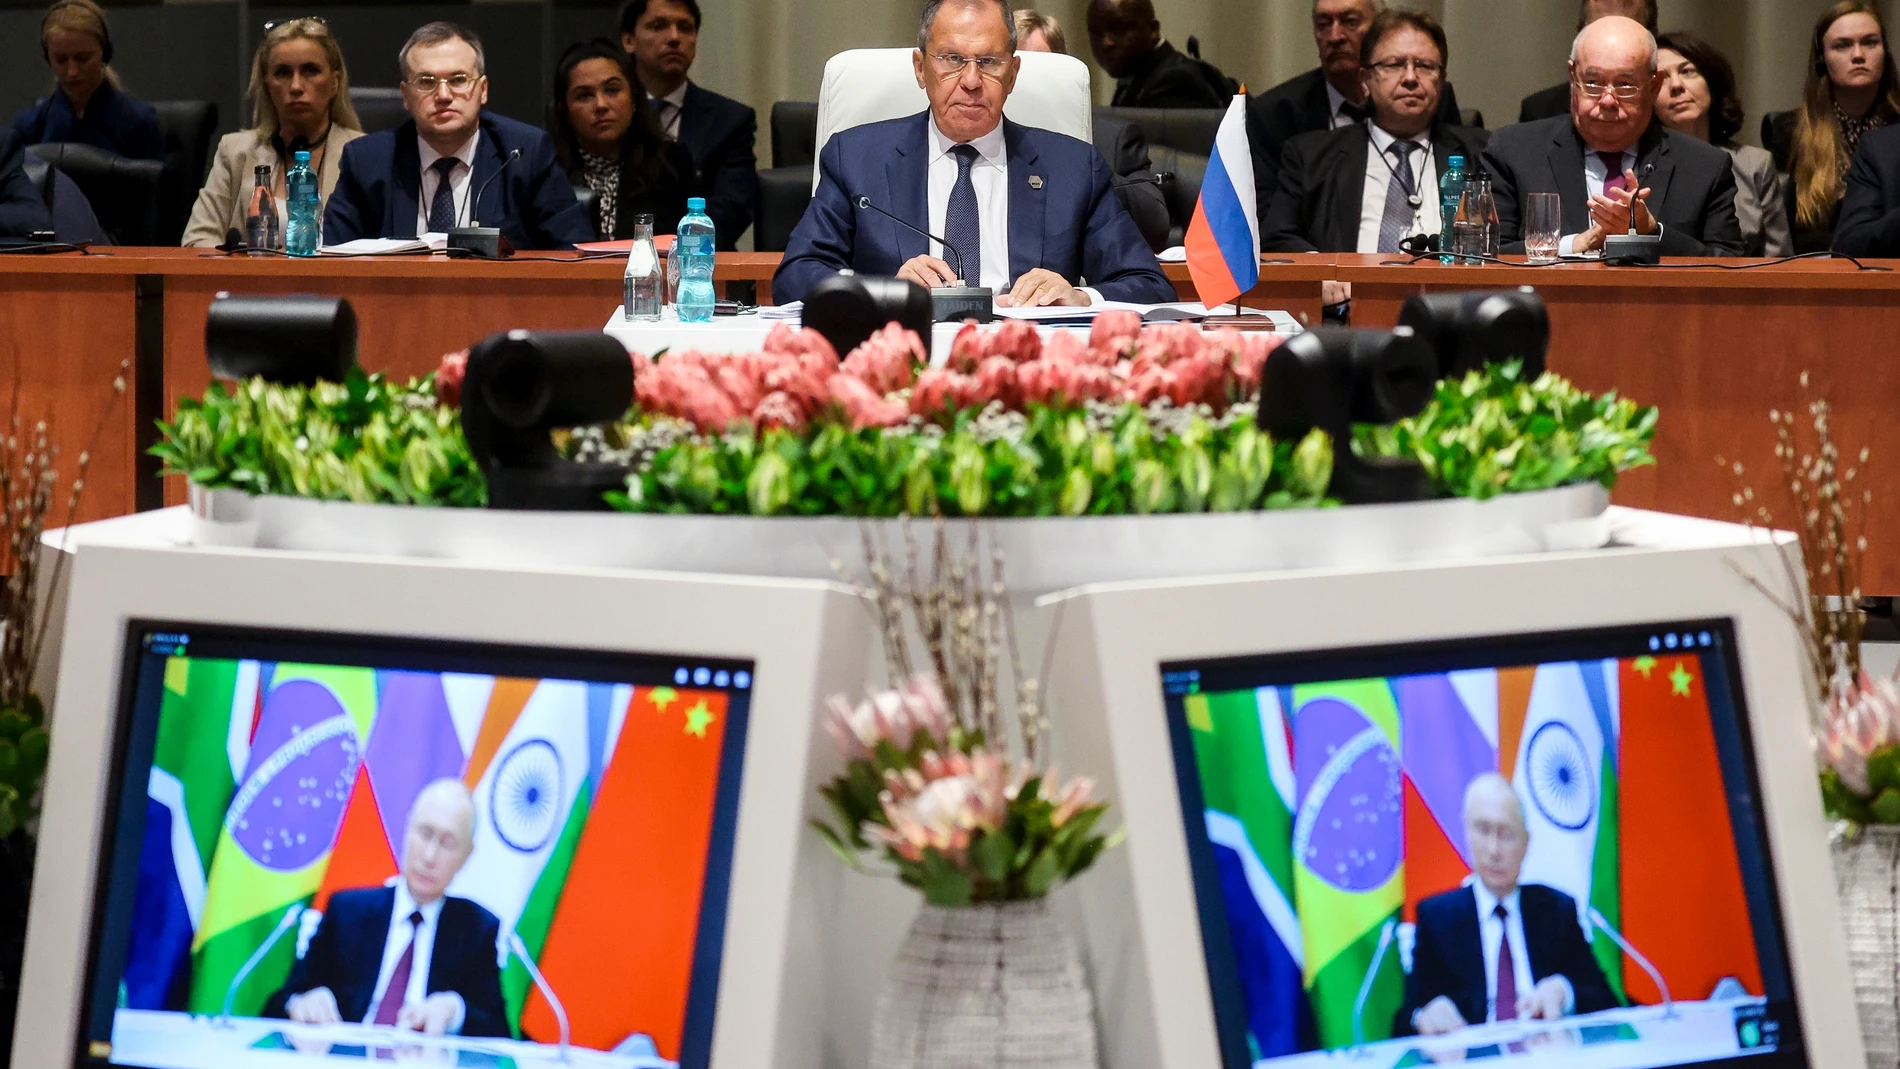 In this photo released by Russian Foreign Ministry Press Service, Russia's Foreign Minister Sergei Lavrov, centre, looks on at the plenary session as Russian President Vladimir Putin delivers his remarks via video link, at the 2023 BRICS Summit in Johannesburg, South Africa, Wednesday, Aug. 23, 2023. (Russian Foreign Ministry Press Service via AP)